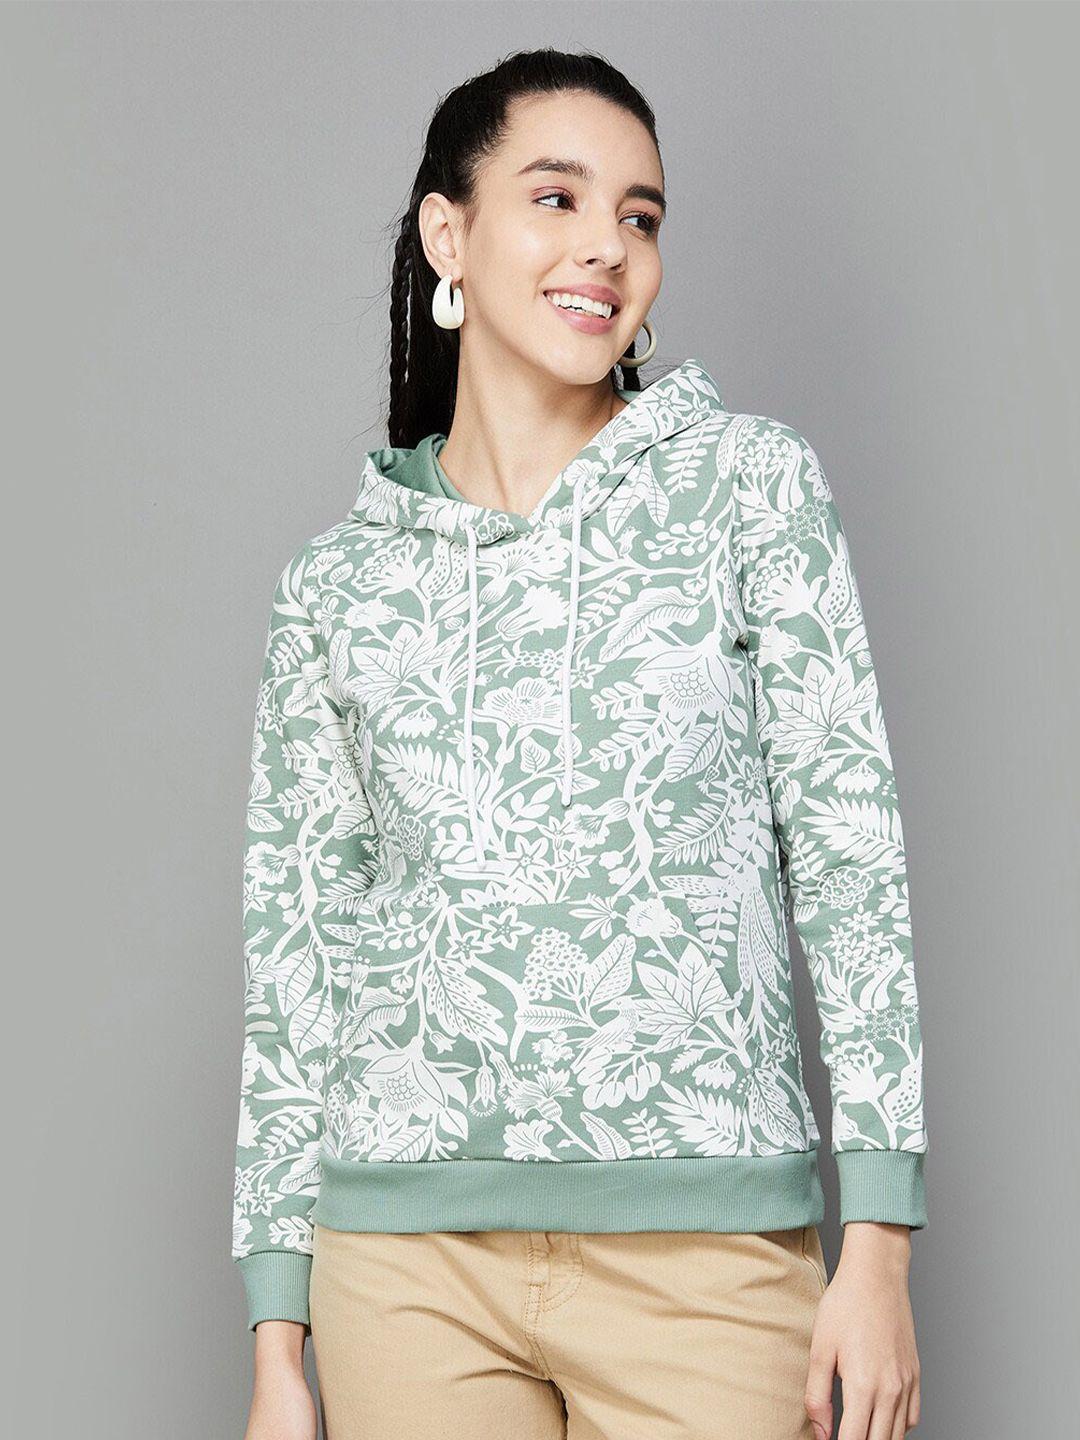 colour me by melange floral printed hooded cotton pullover sweatshirt